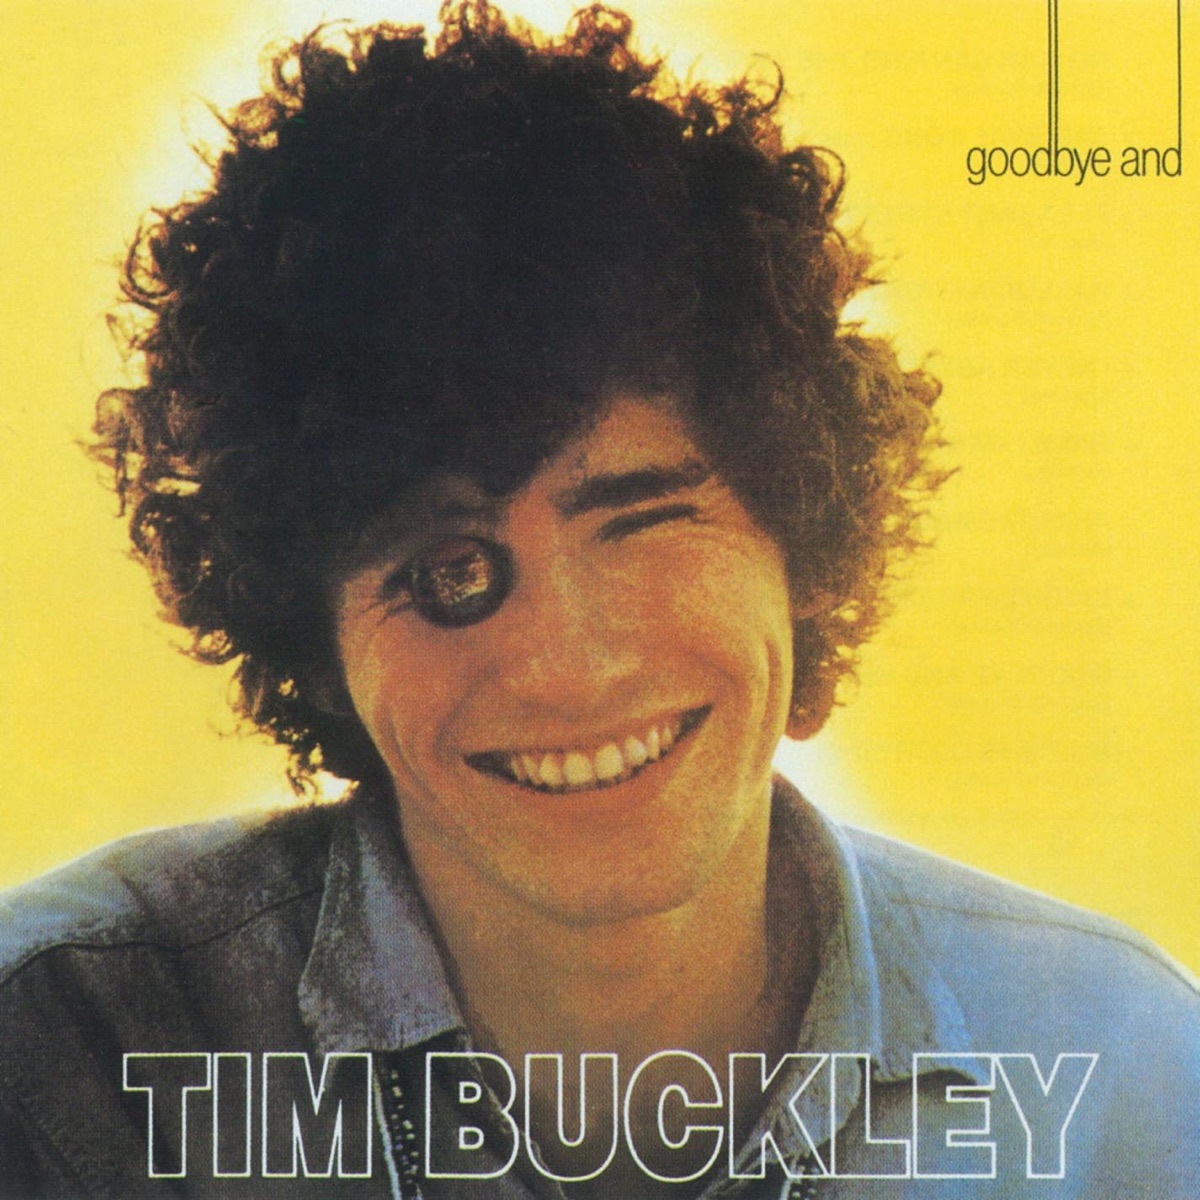 Venice Mating Call (Remastered) by Tim Buckley Apple Music